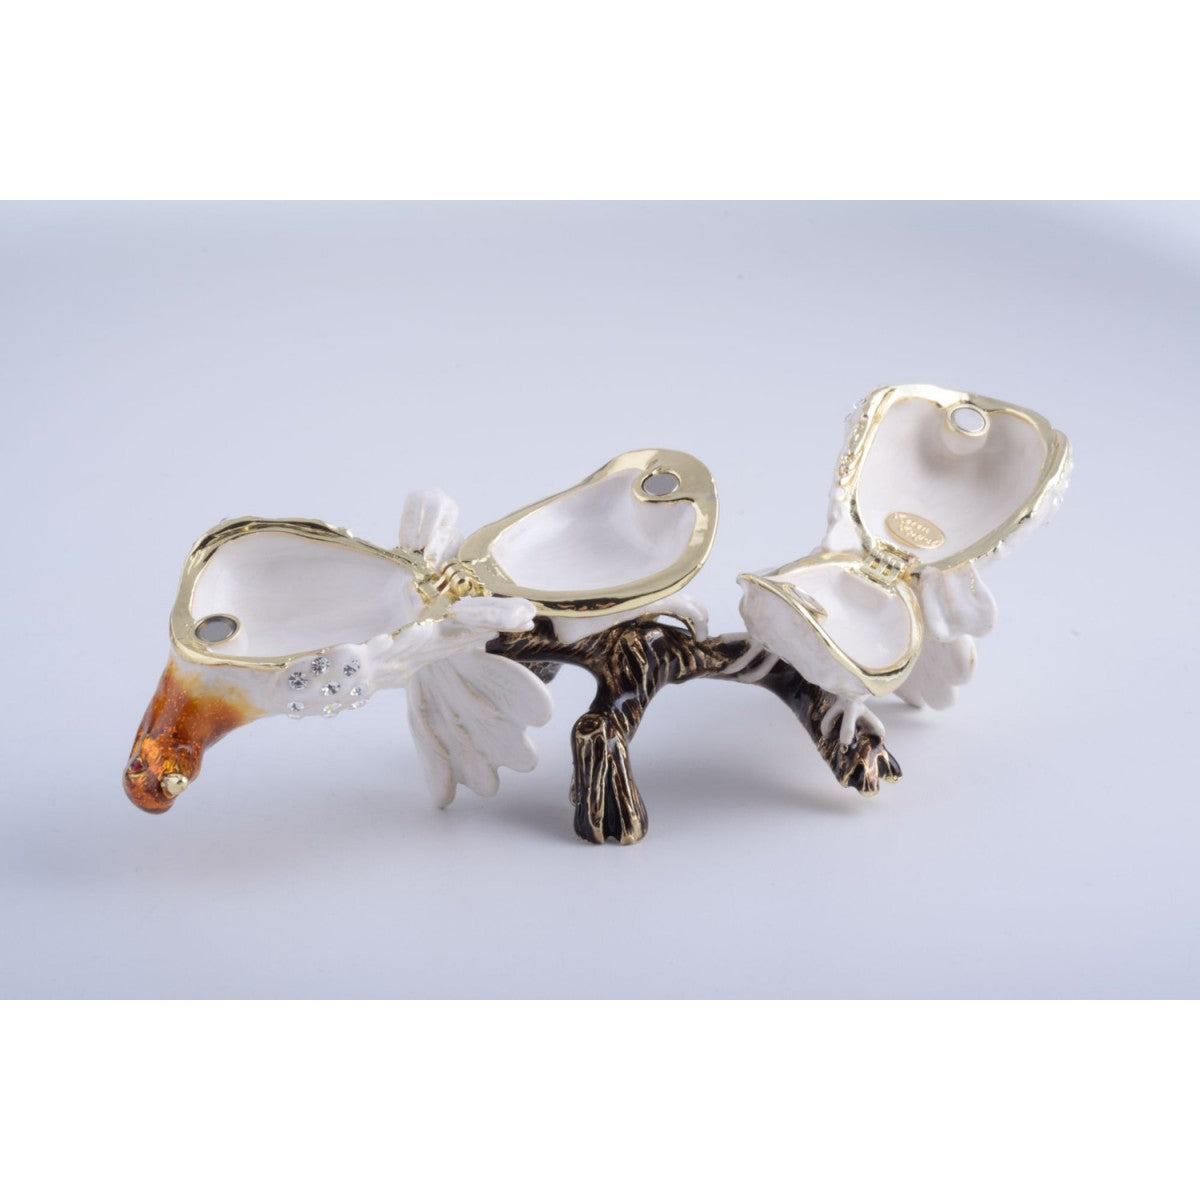 White Birds on a Branch Faberge Style Trinket Box